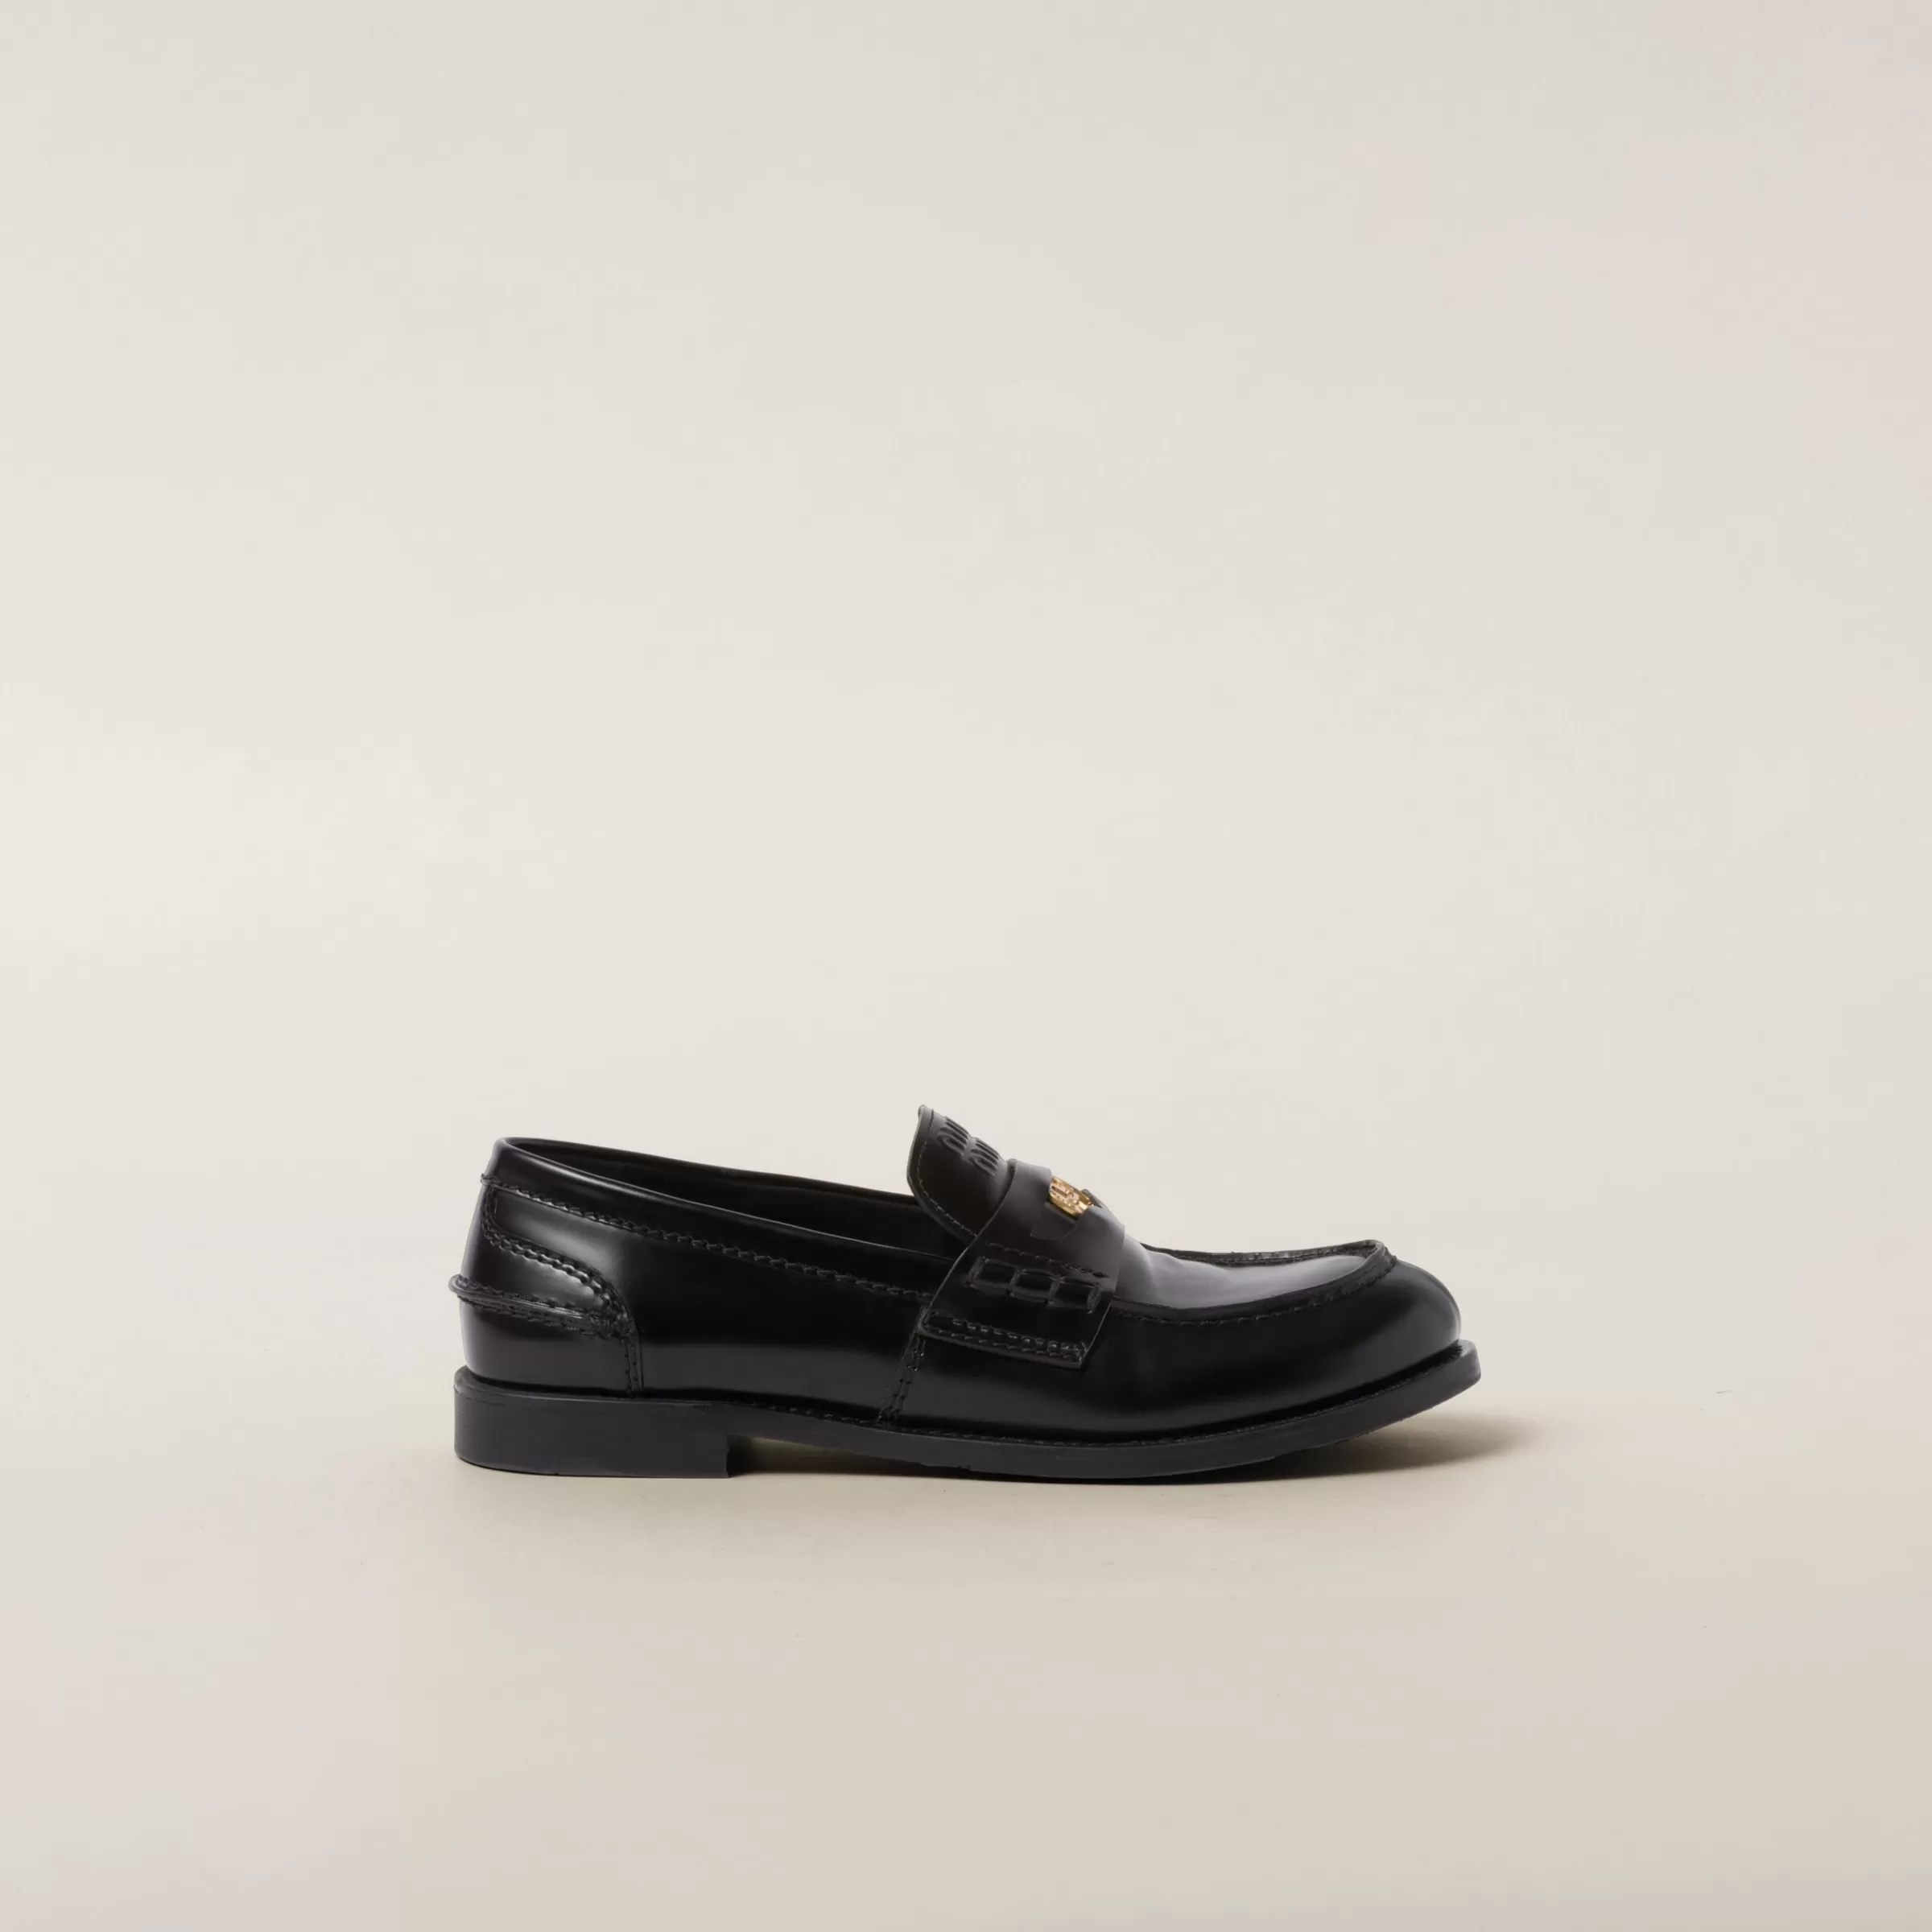 Miu Miu Brushed Leather Penny Loafers |